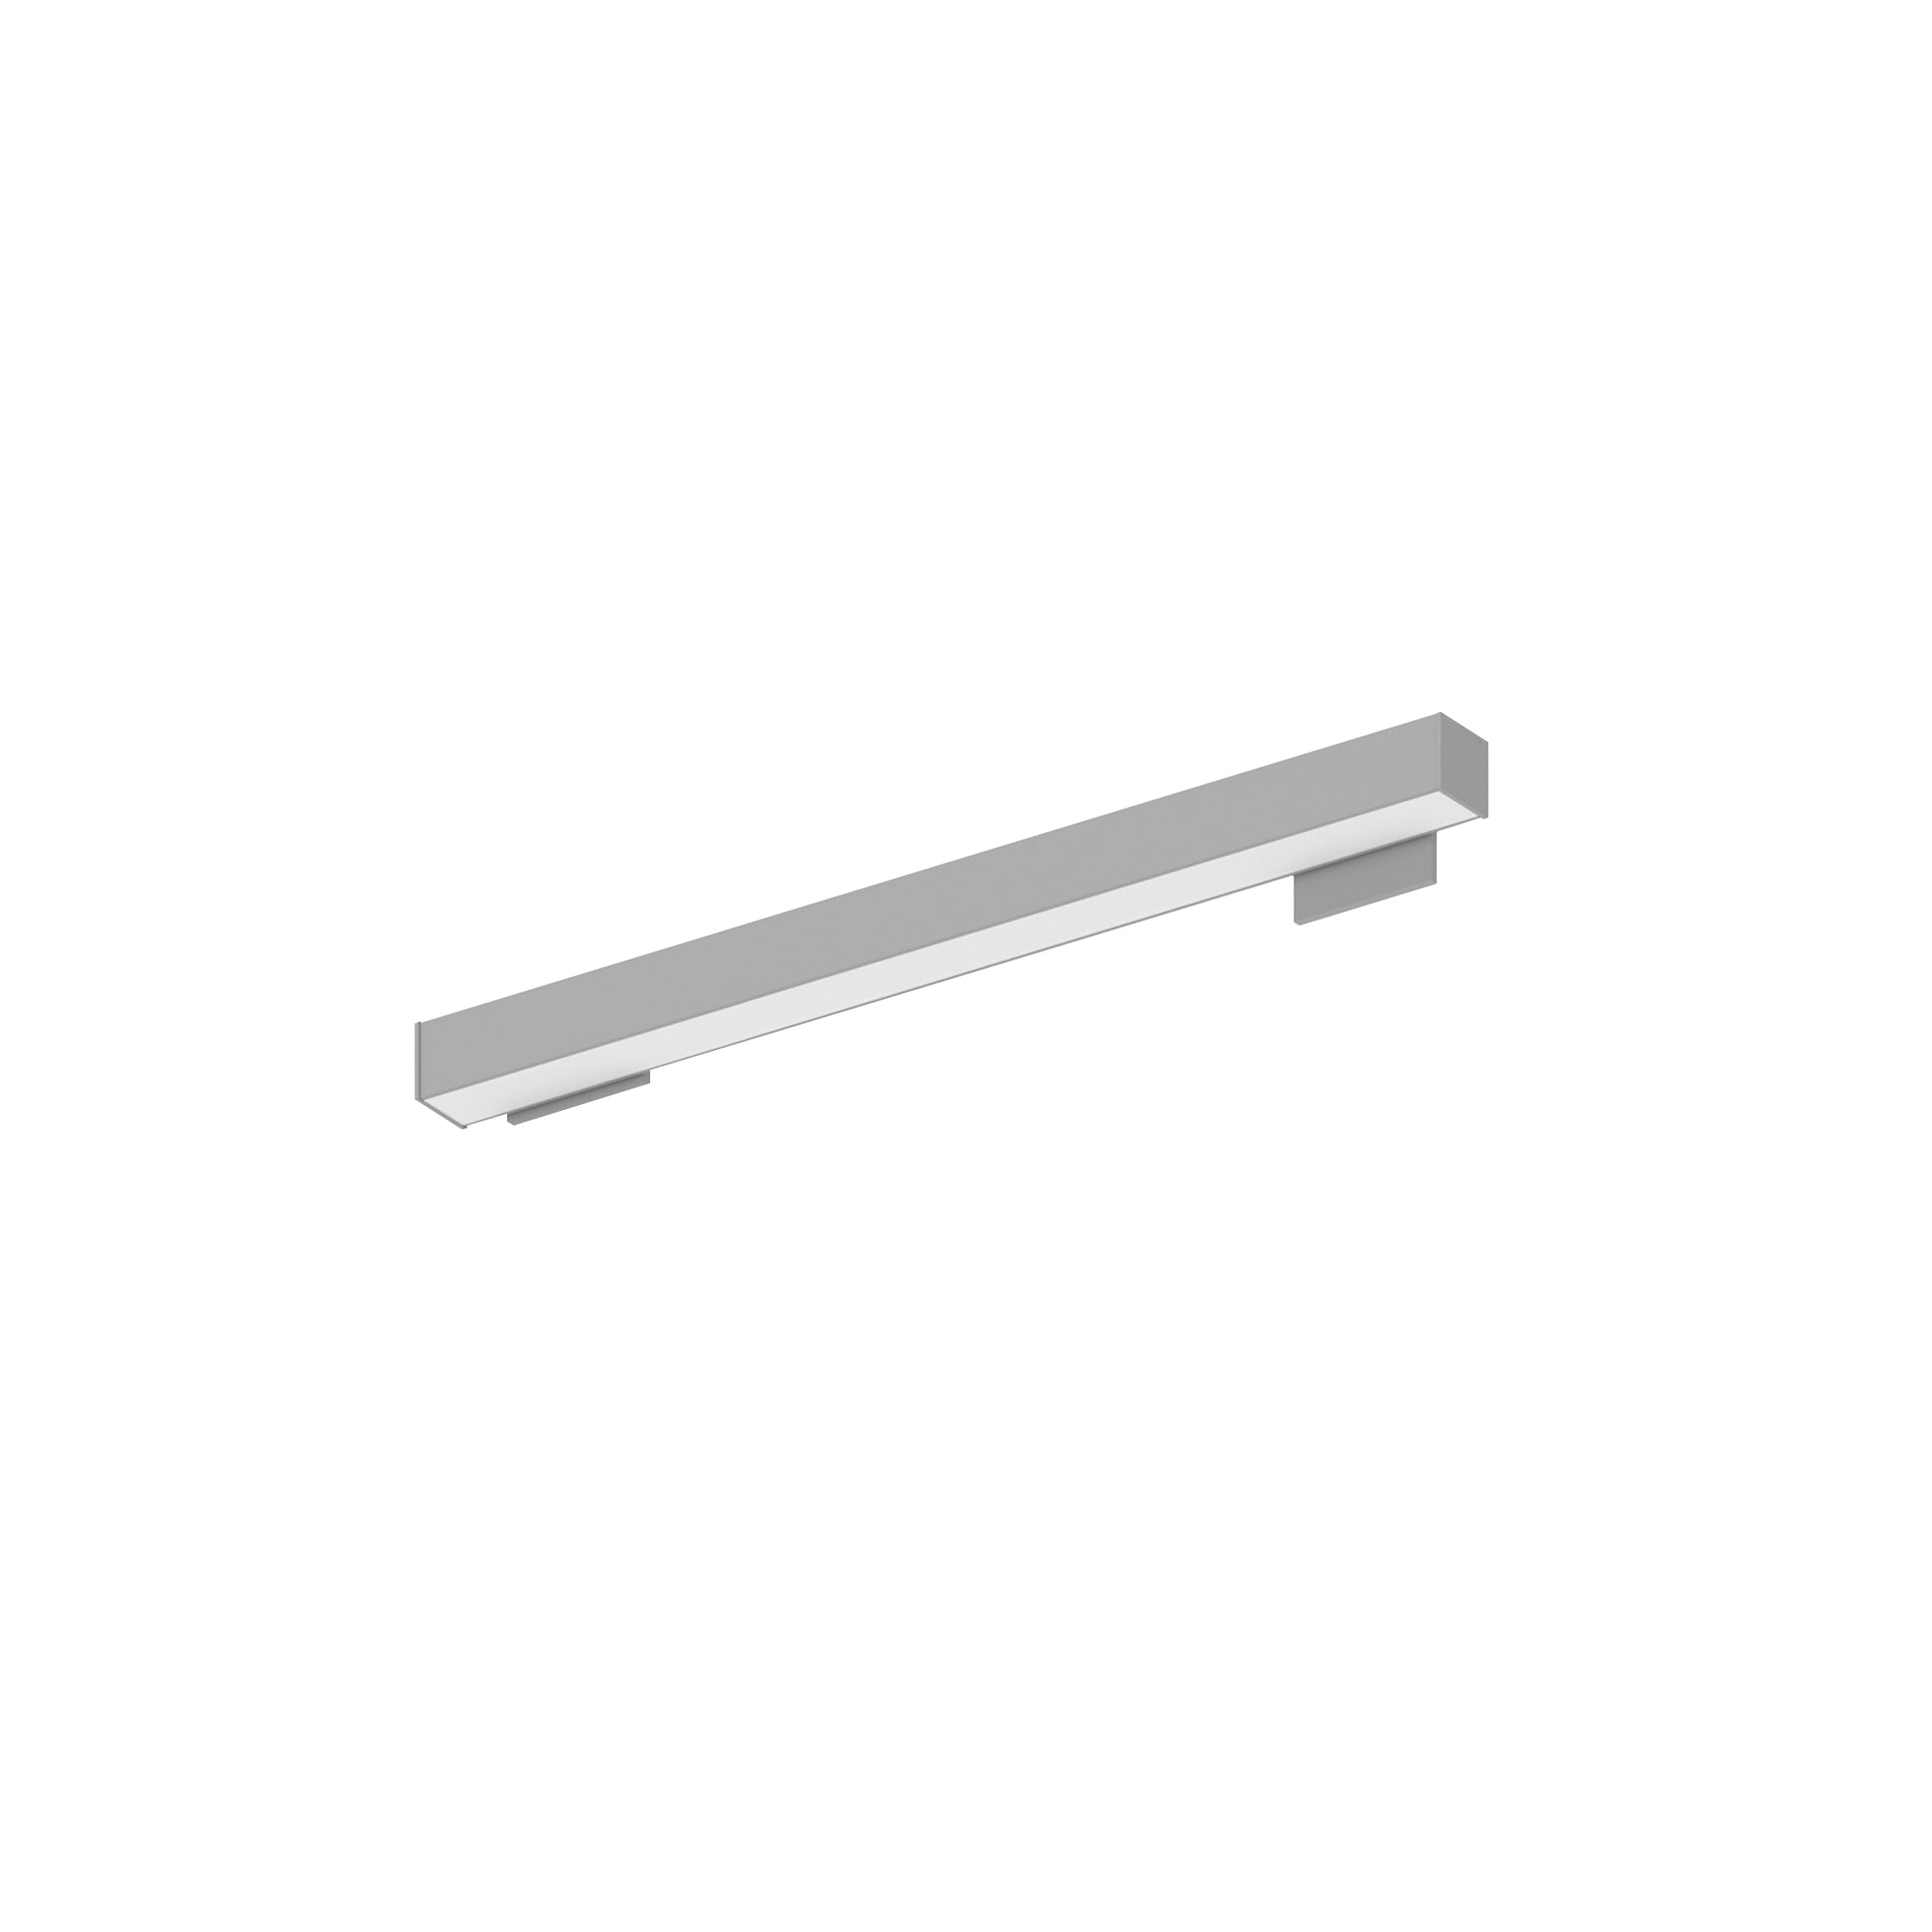 Nora Lighting NWLIN-21035A/L2P-R4 - Linear - 2' L-Line LED Wall Mount Linear, 2100lm / 3500K, 2 Inchx4 Inch Left Plate & 4 Inchx4 Inch Right Plate, Left Power Feed, Aluminum Finish